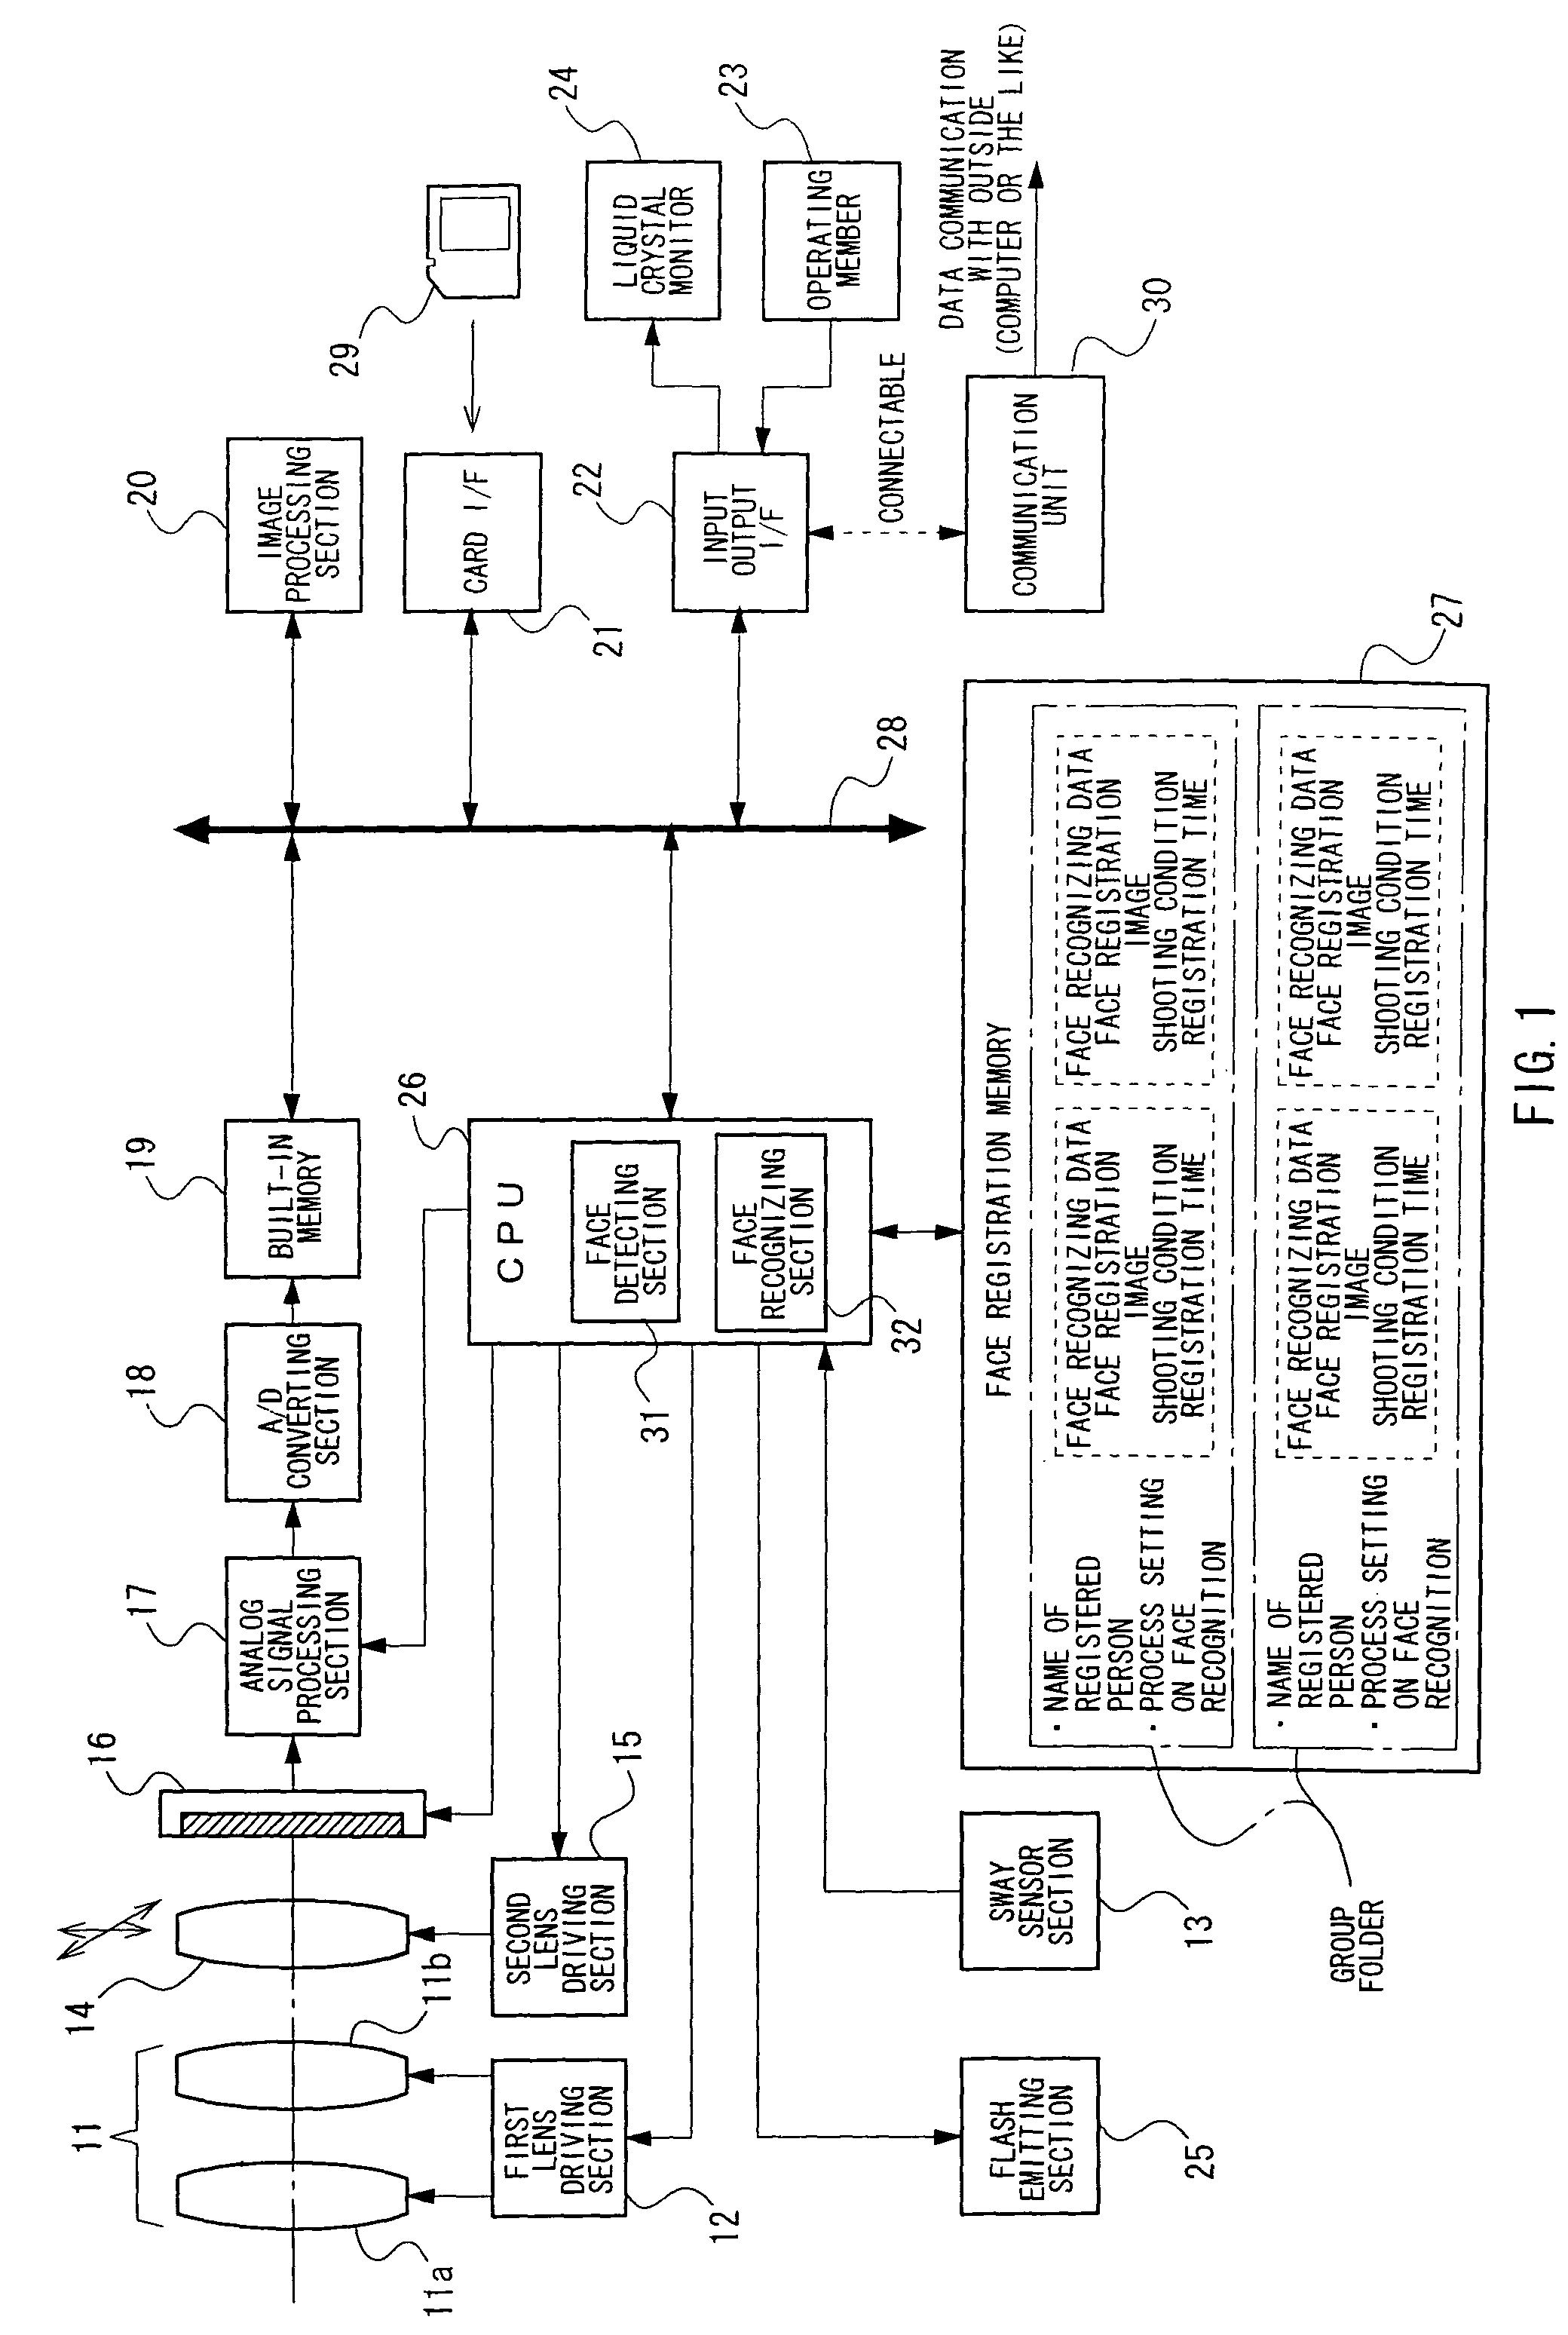 Electronic camera and image processing device